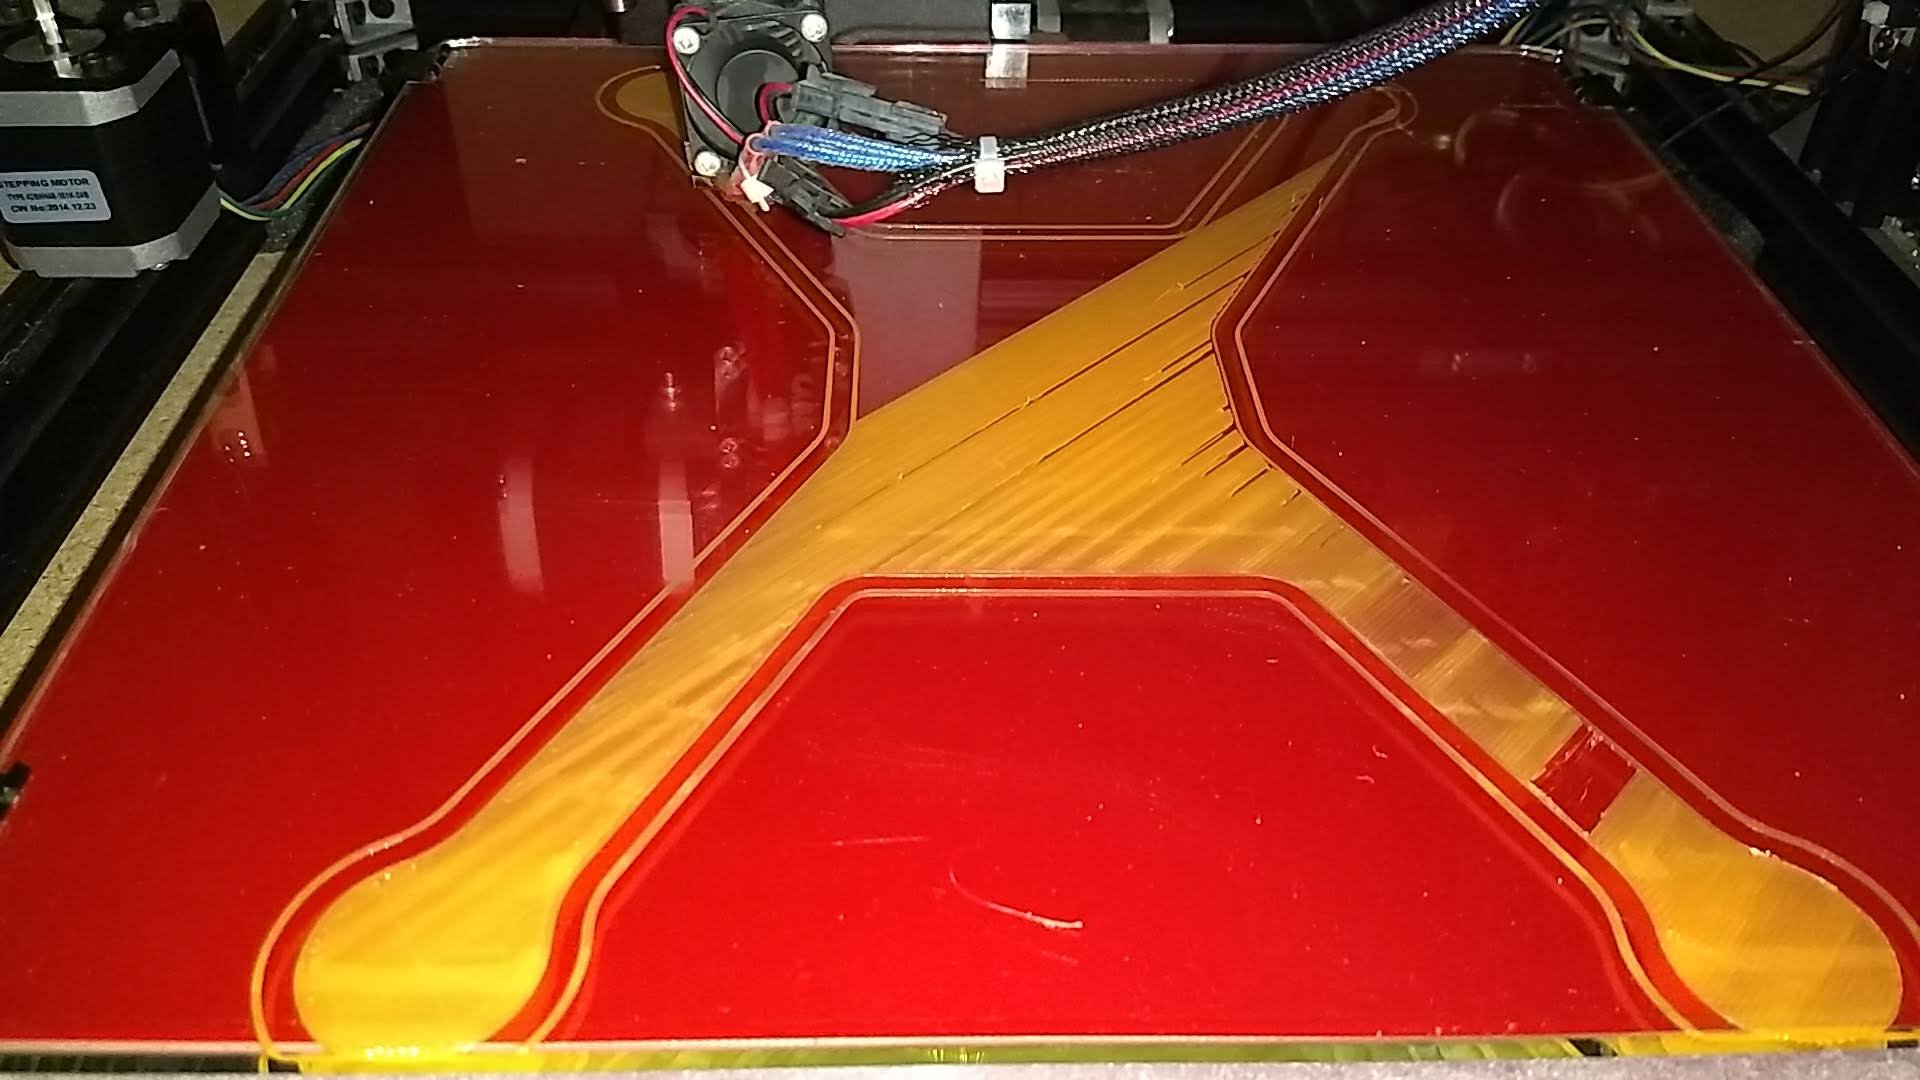 See diagonal traces where plastic didn't extrude